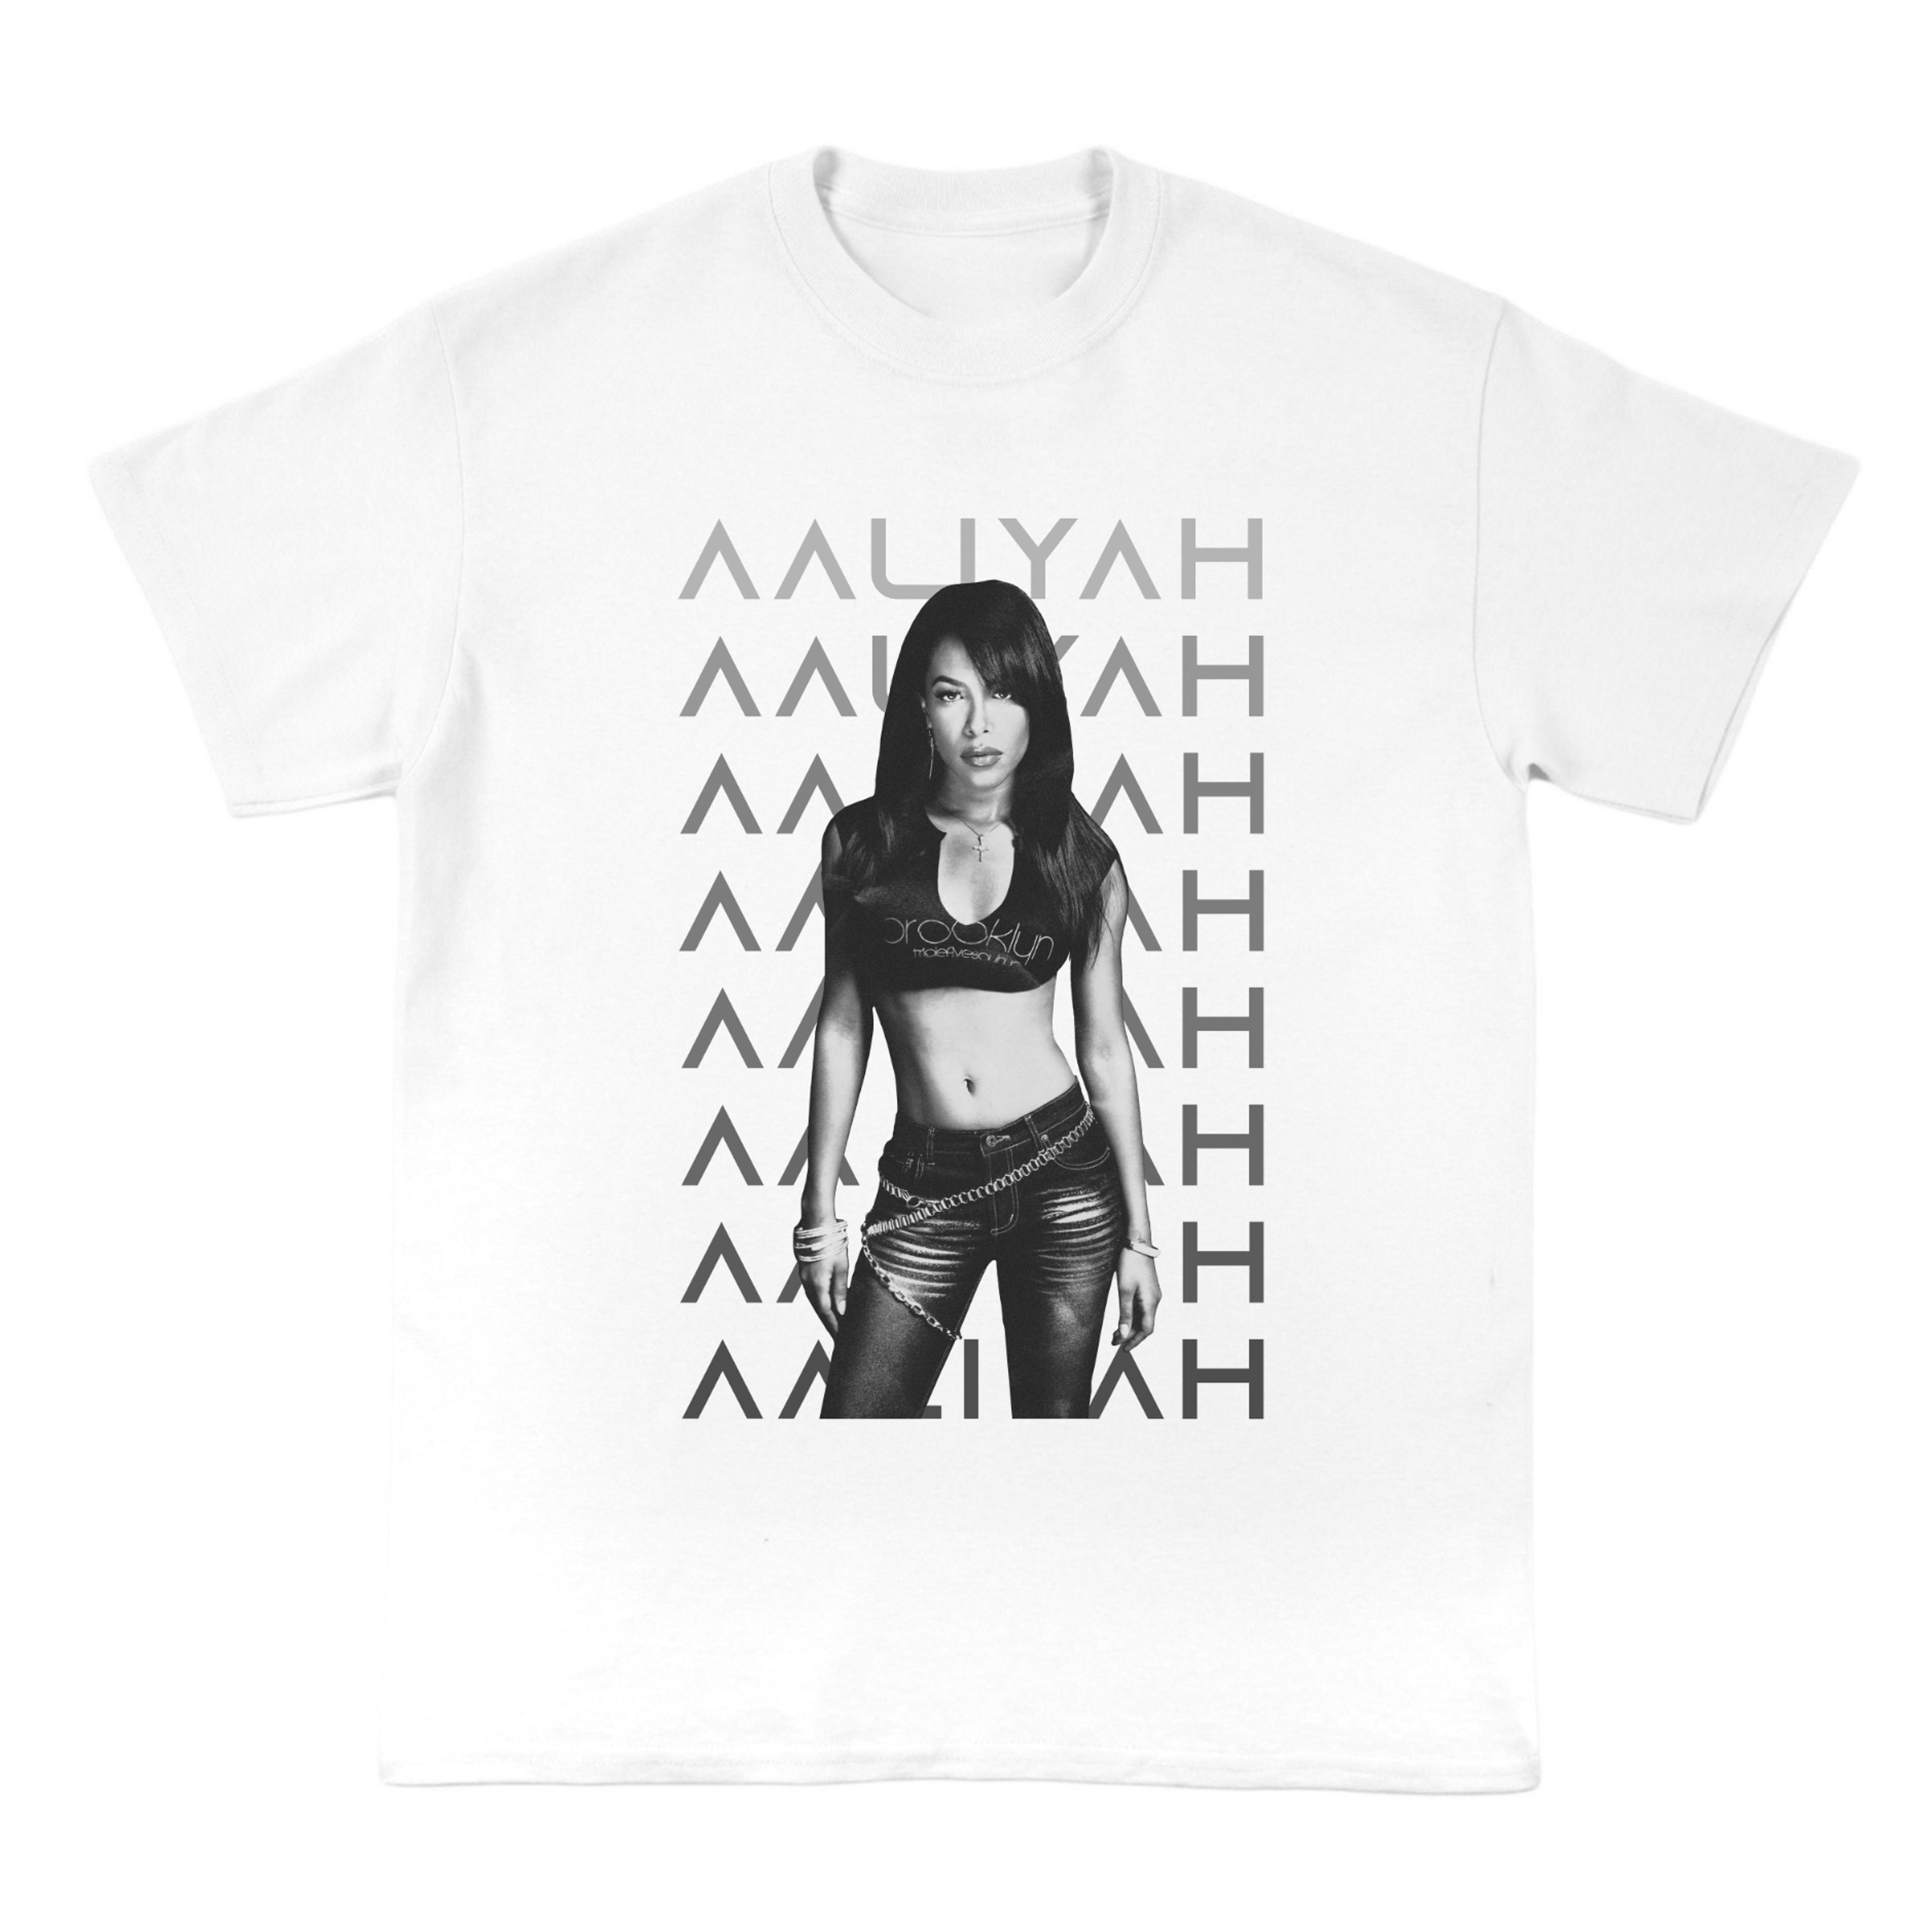 Aaliyah "Forever Aaliyah" Officially Licensed T-Shirt